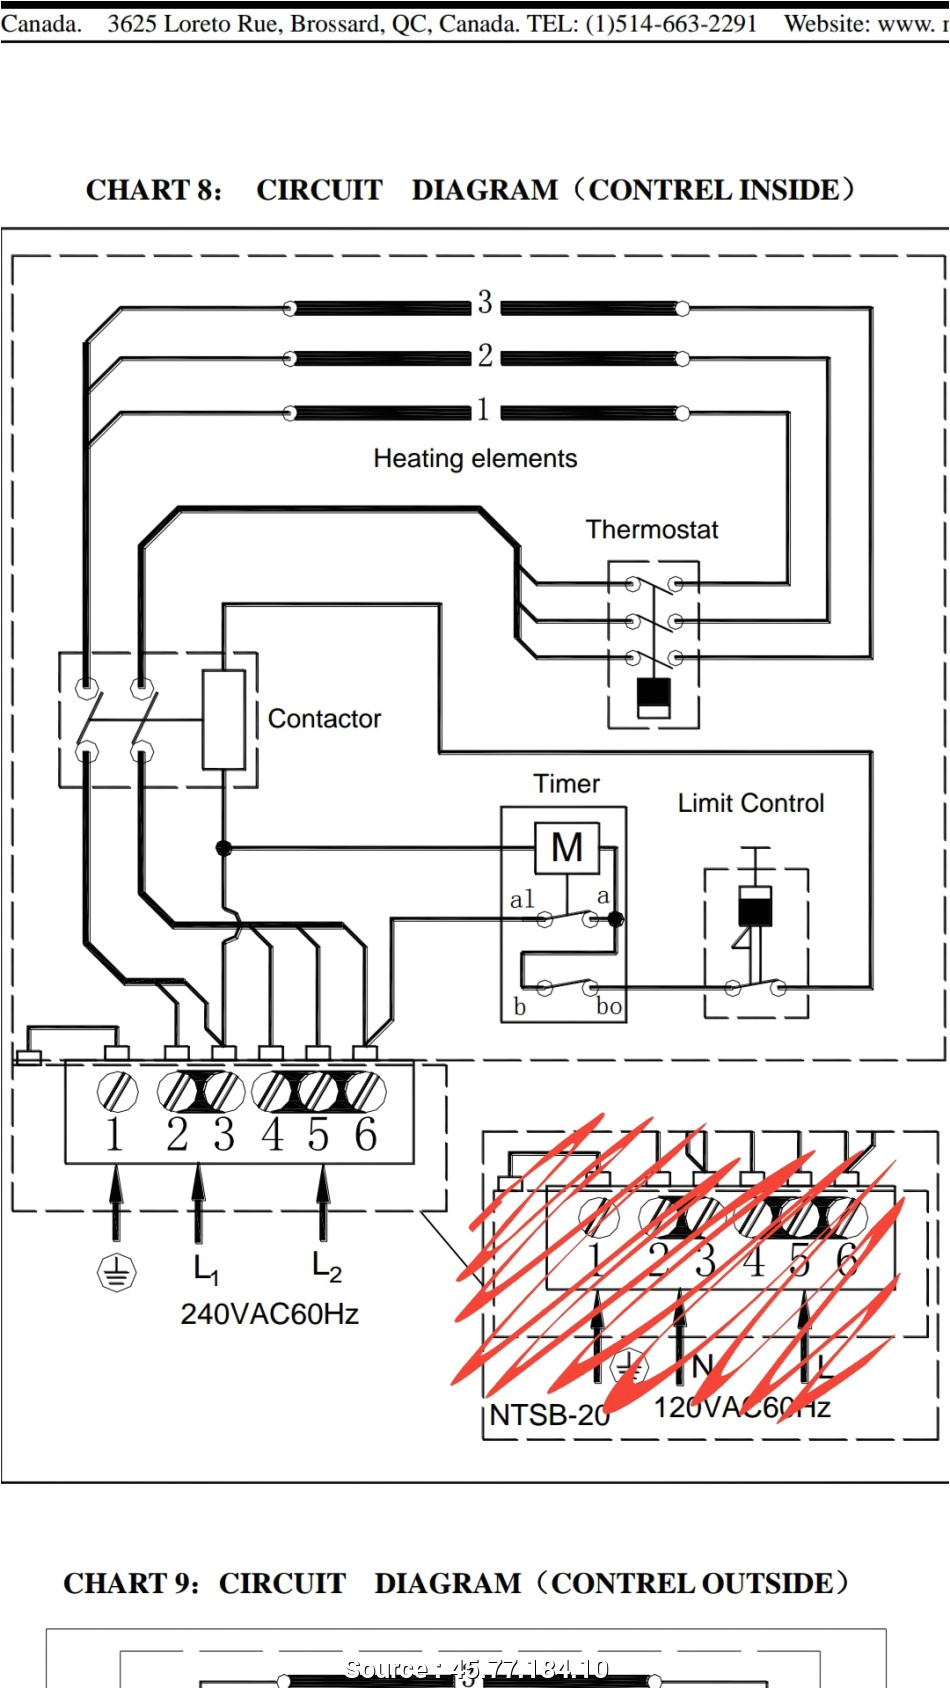 Sauna Wiring Diagram 3 Way Switch Wiring Diagrams Air Conditioning Wiring Library